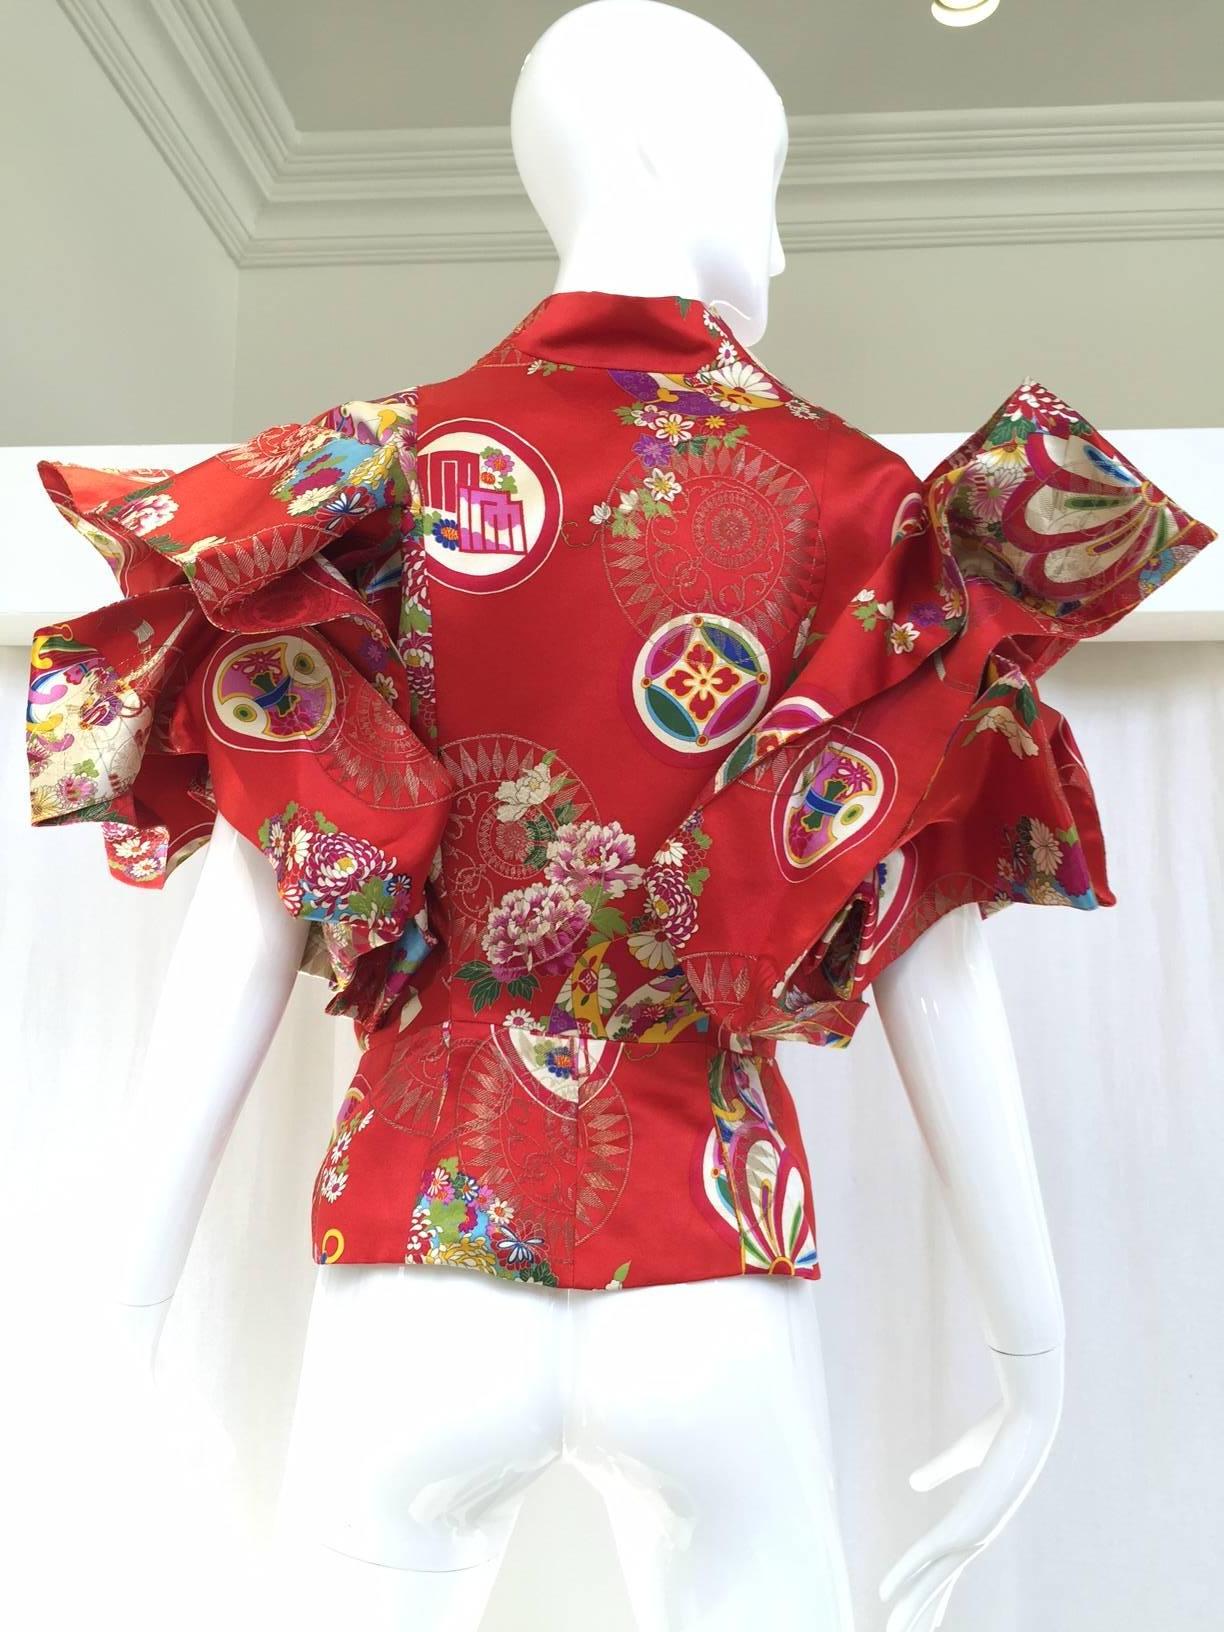 Rare Dramatic Christian Dior red chinese inspired silk brocade jacket designed by John Galliano. Dramatic sleeves. Jacket lined in silk. Must-have jacket for vintage collector or museum. 
Beautiful museum quality piece. In excellent condition! Size: